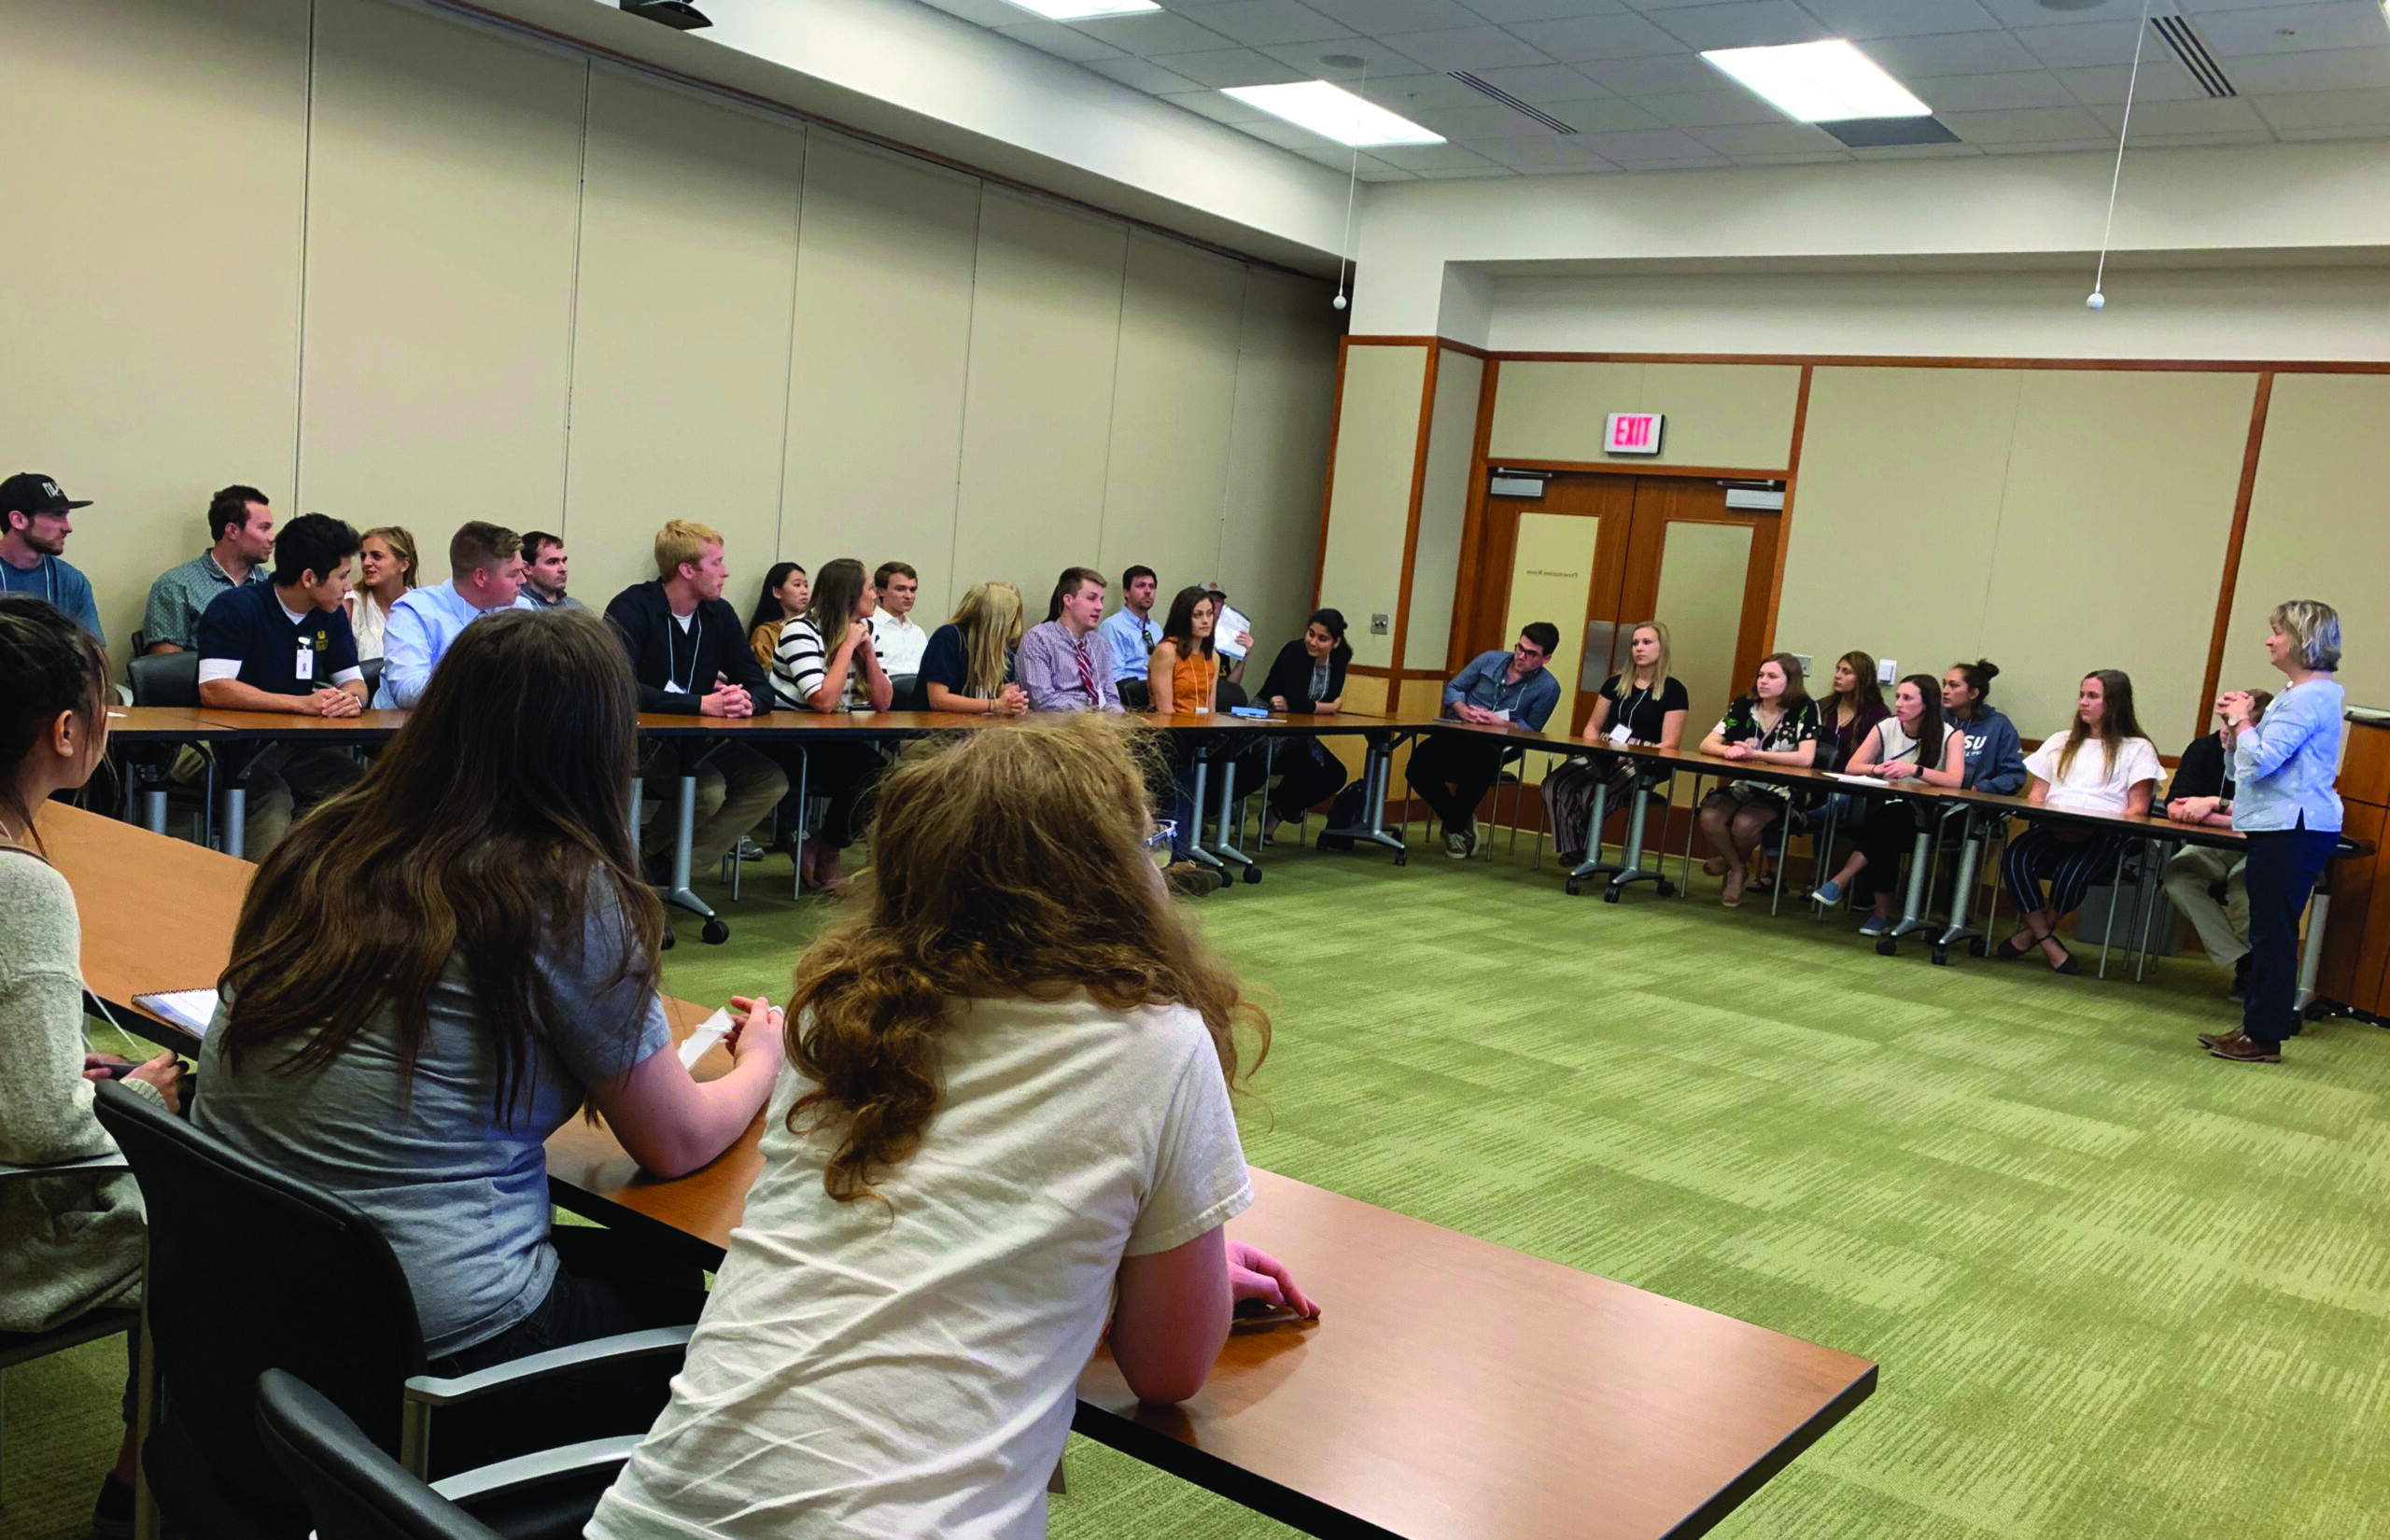 INTERN Sioux Falls welcomes first cohort to Sioux Falls with planned engagement activities